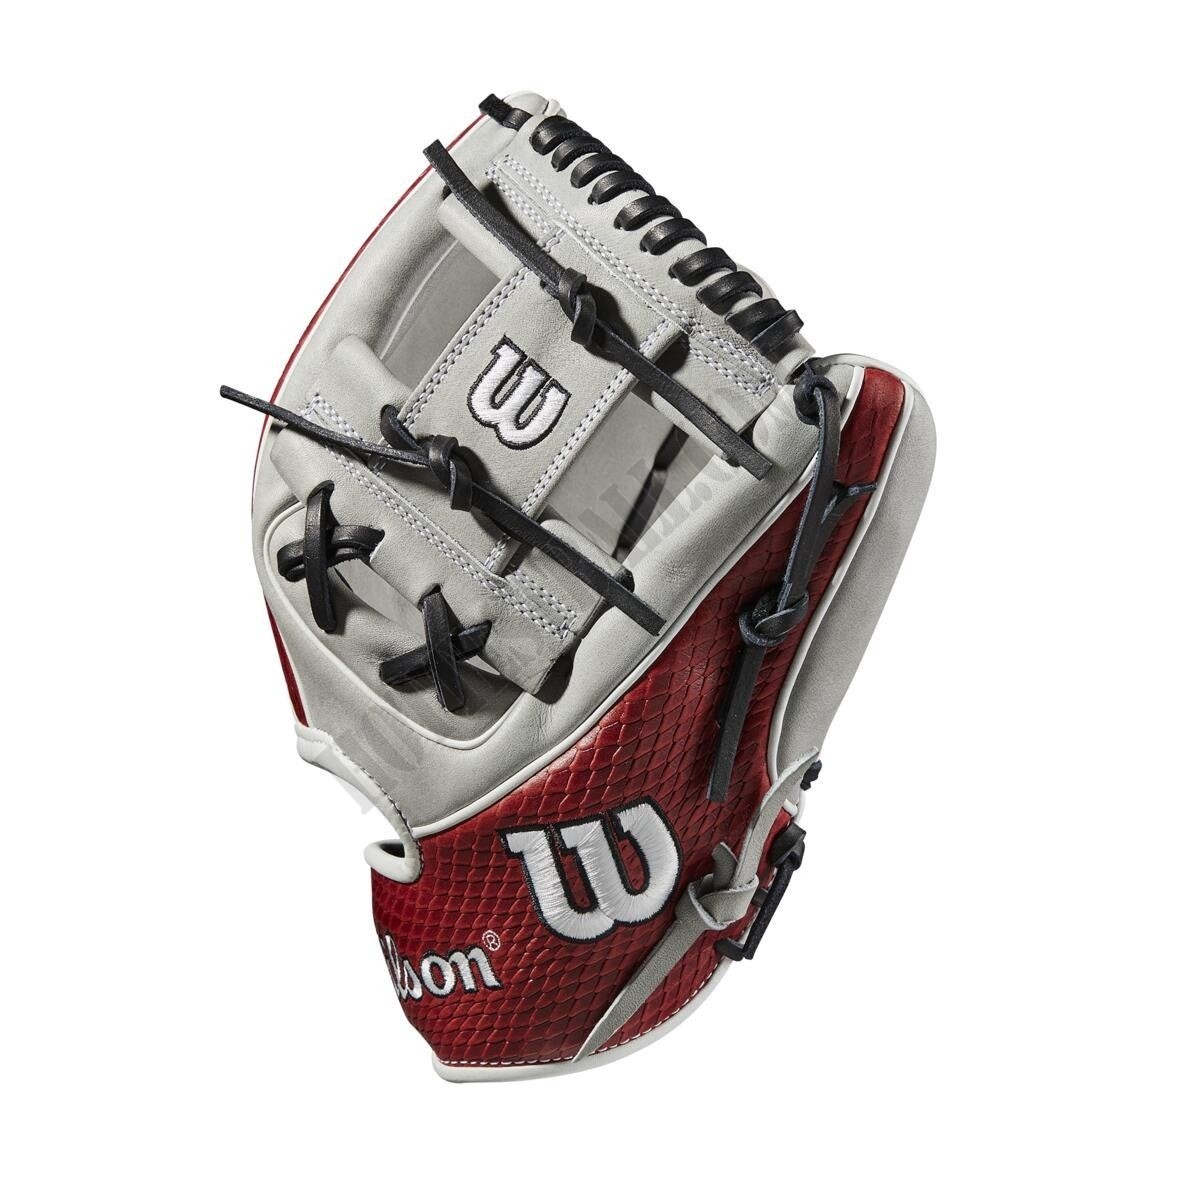 2021 A2K 1786SS 11.5" Infield Baseball Glove - Limited Edition ● Wilson Promotions - -3